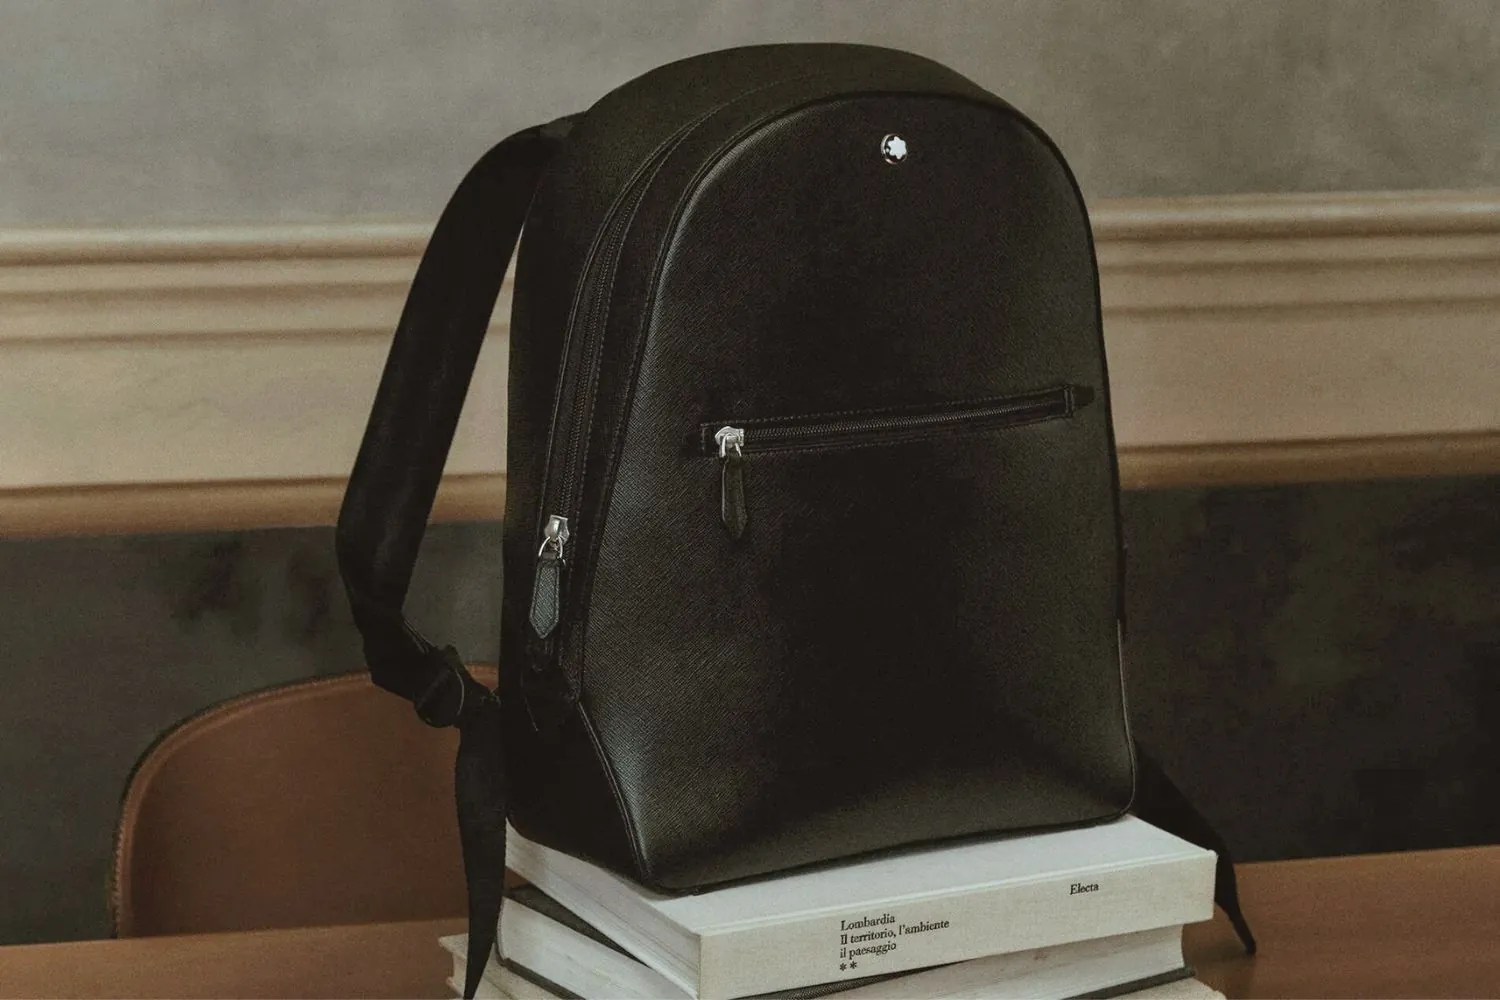 For urban getaways, one of the recommendations is to bring leather backpacks